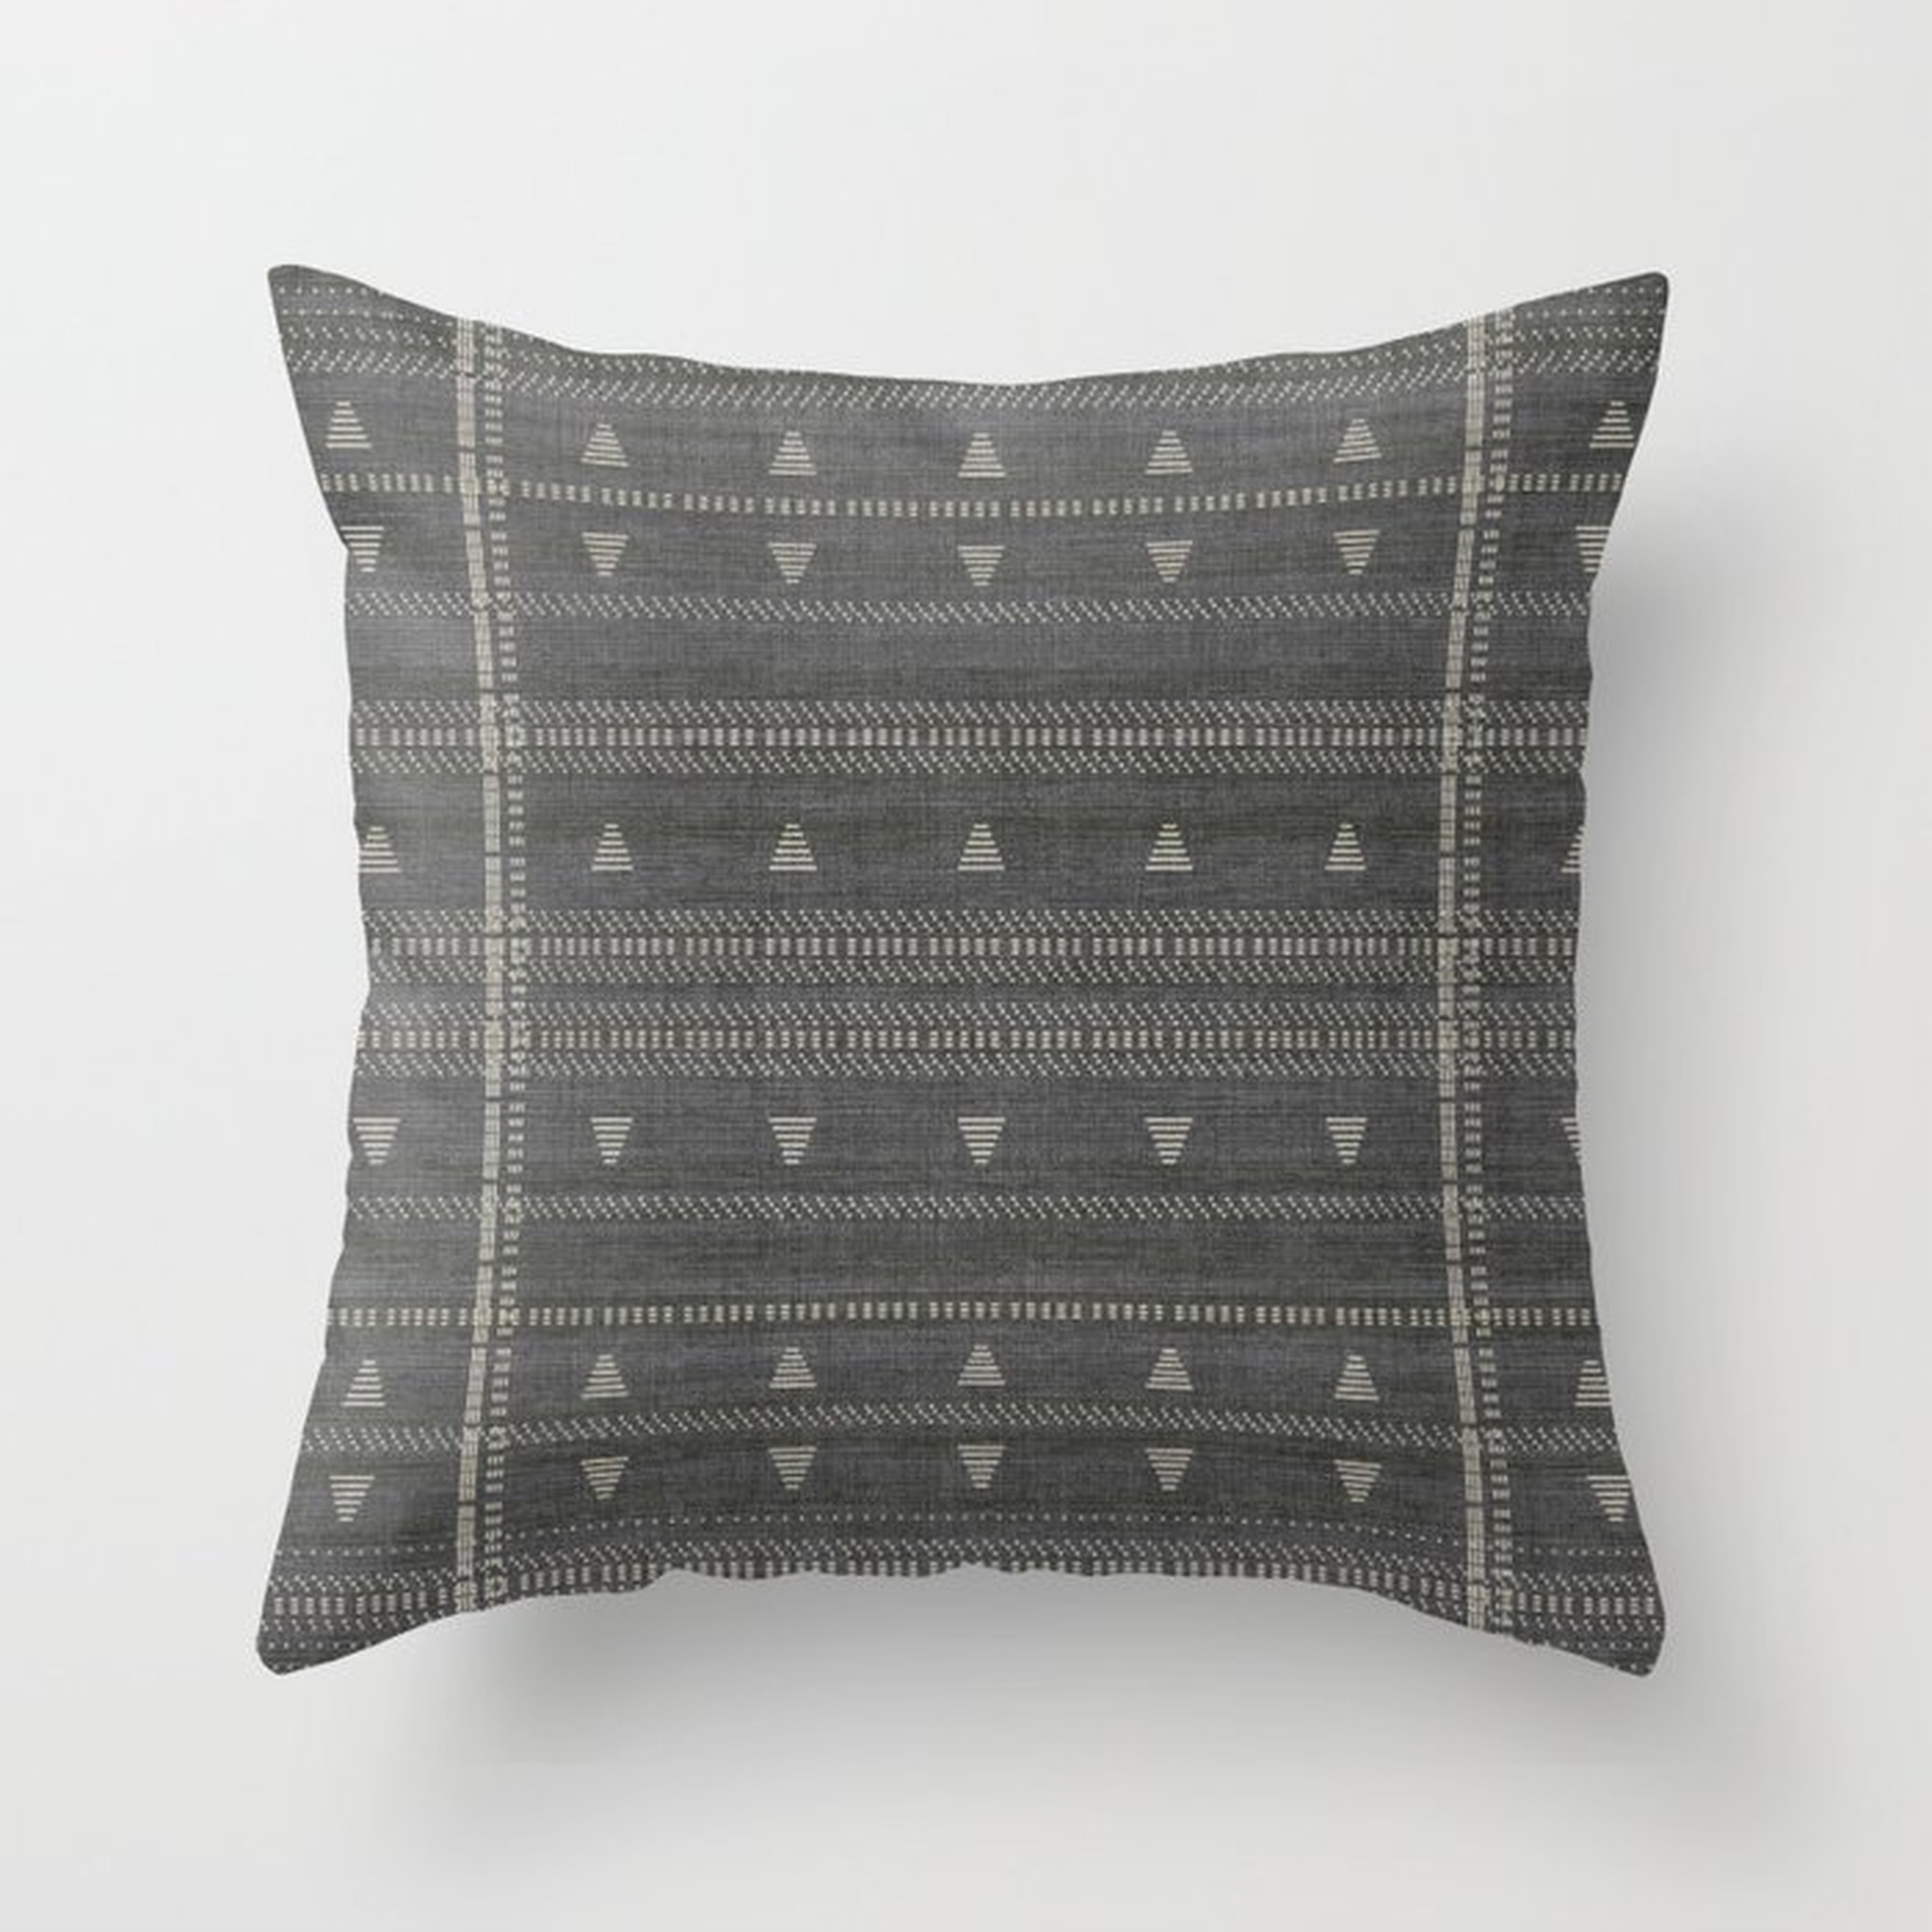 Heddle In Charcoal Throw Pillow by House Of Haha - Cover (20" x 20") With Pillow Insert - Outdoor Pillow - Society6